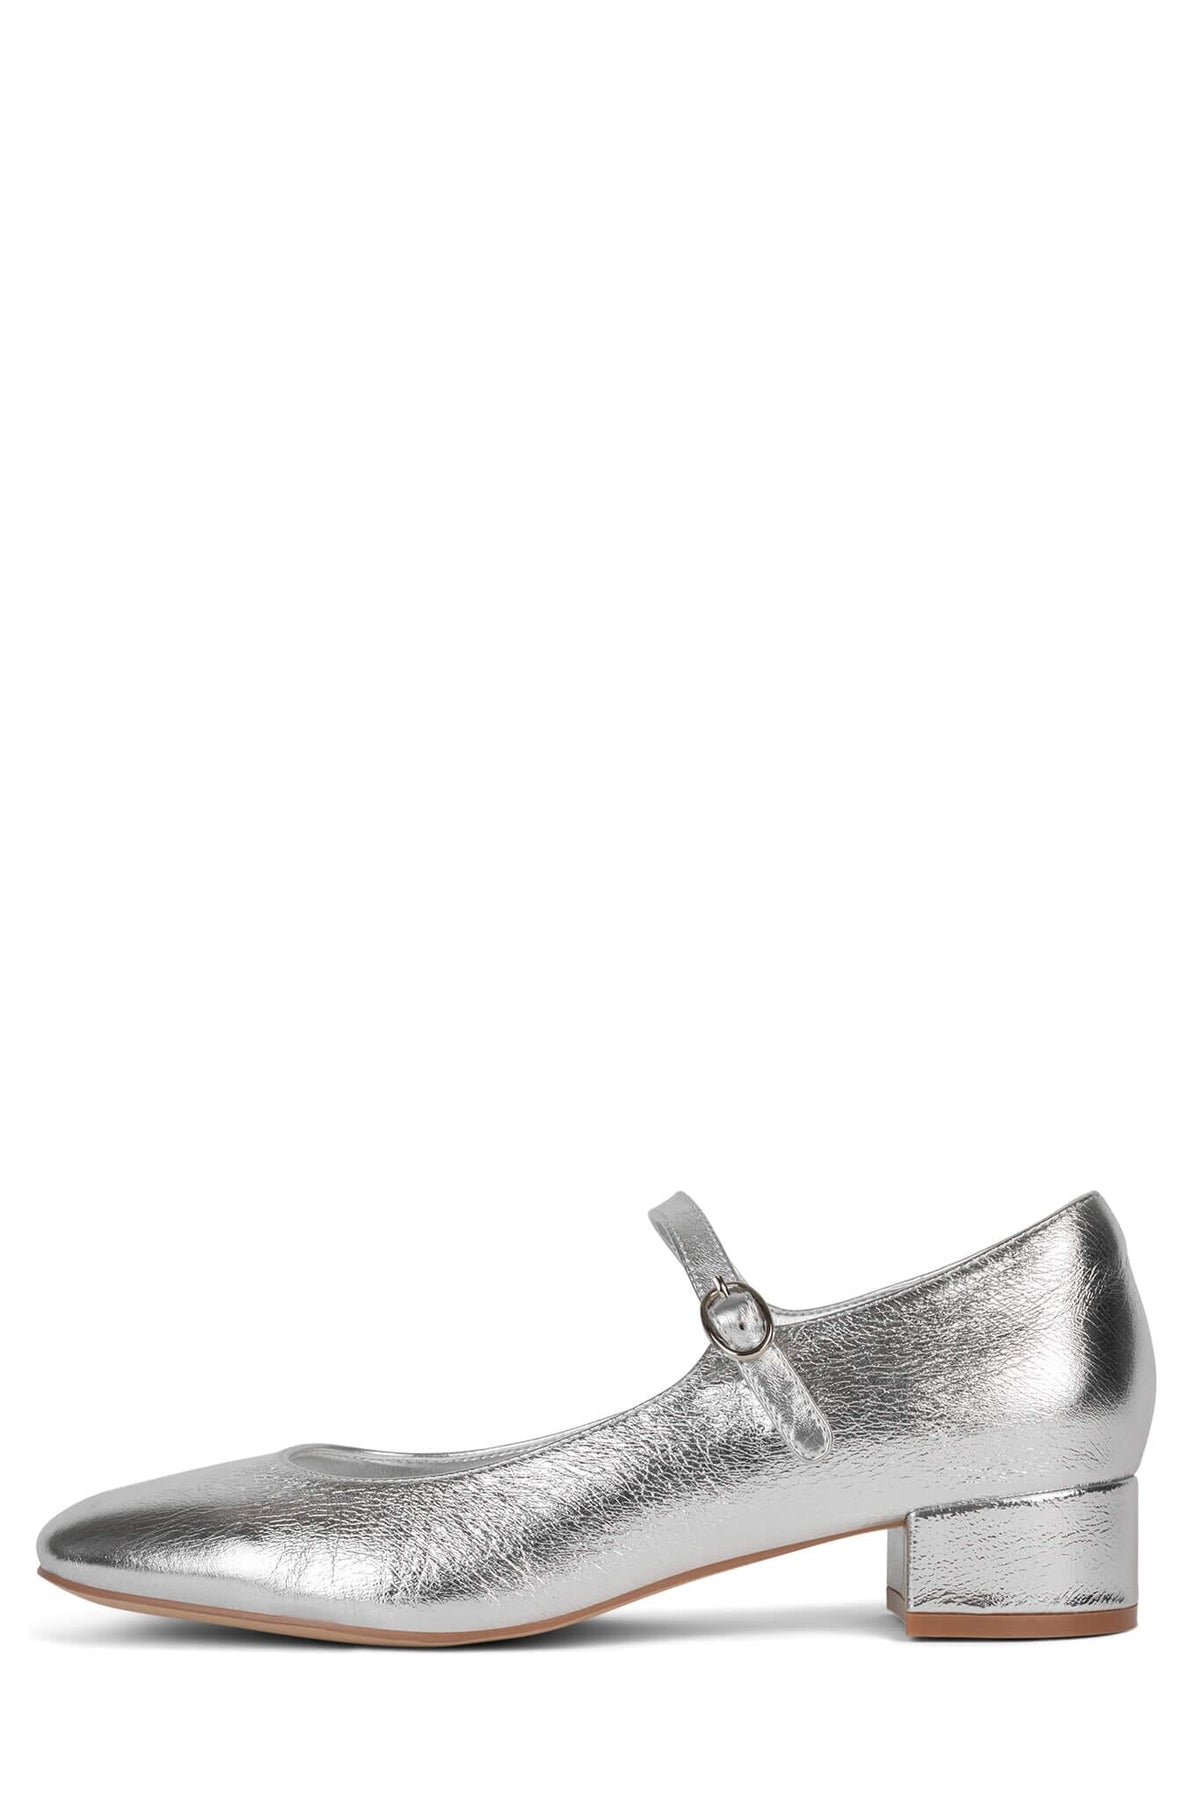 TOP-TIER Jeffrey Campbell Mary-Janes Silver